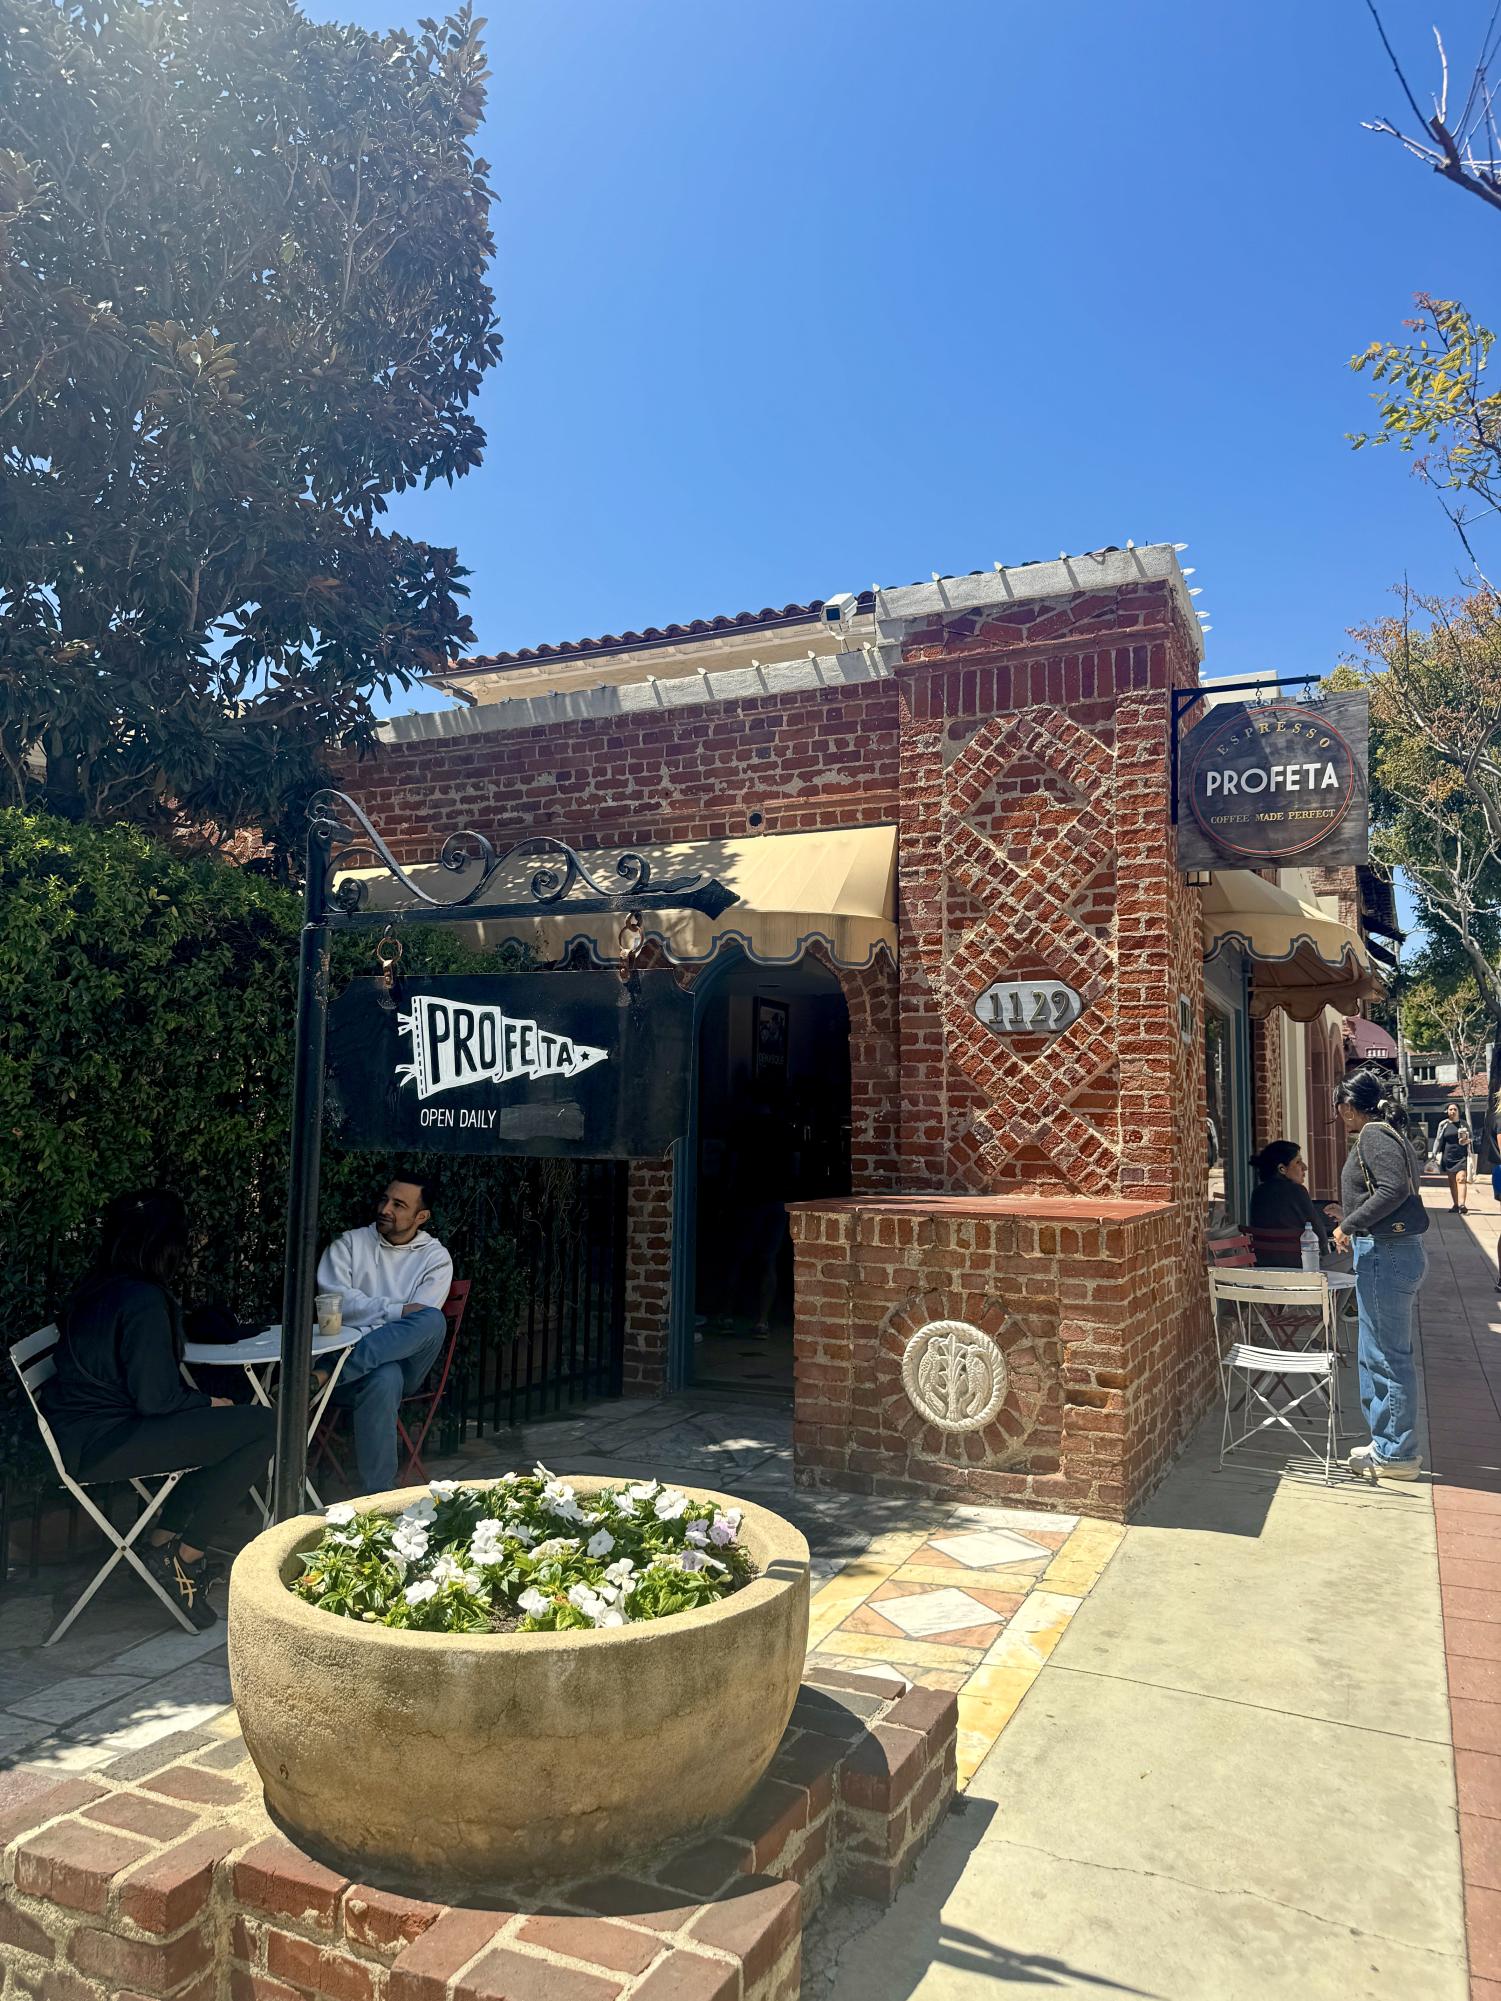 Cafe goers enjoy their drinks and pastries in front of Espresso Profeta. Not only does Espresso Profeta offer delicious drinks and pastries, but it also provides a beautiful outdoor courtyard to enjoy your goods. 